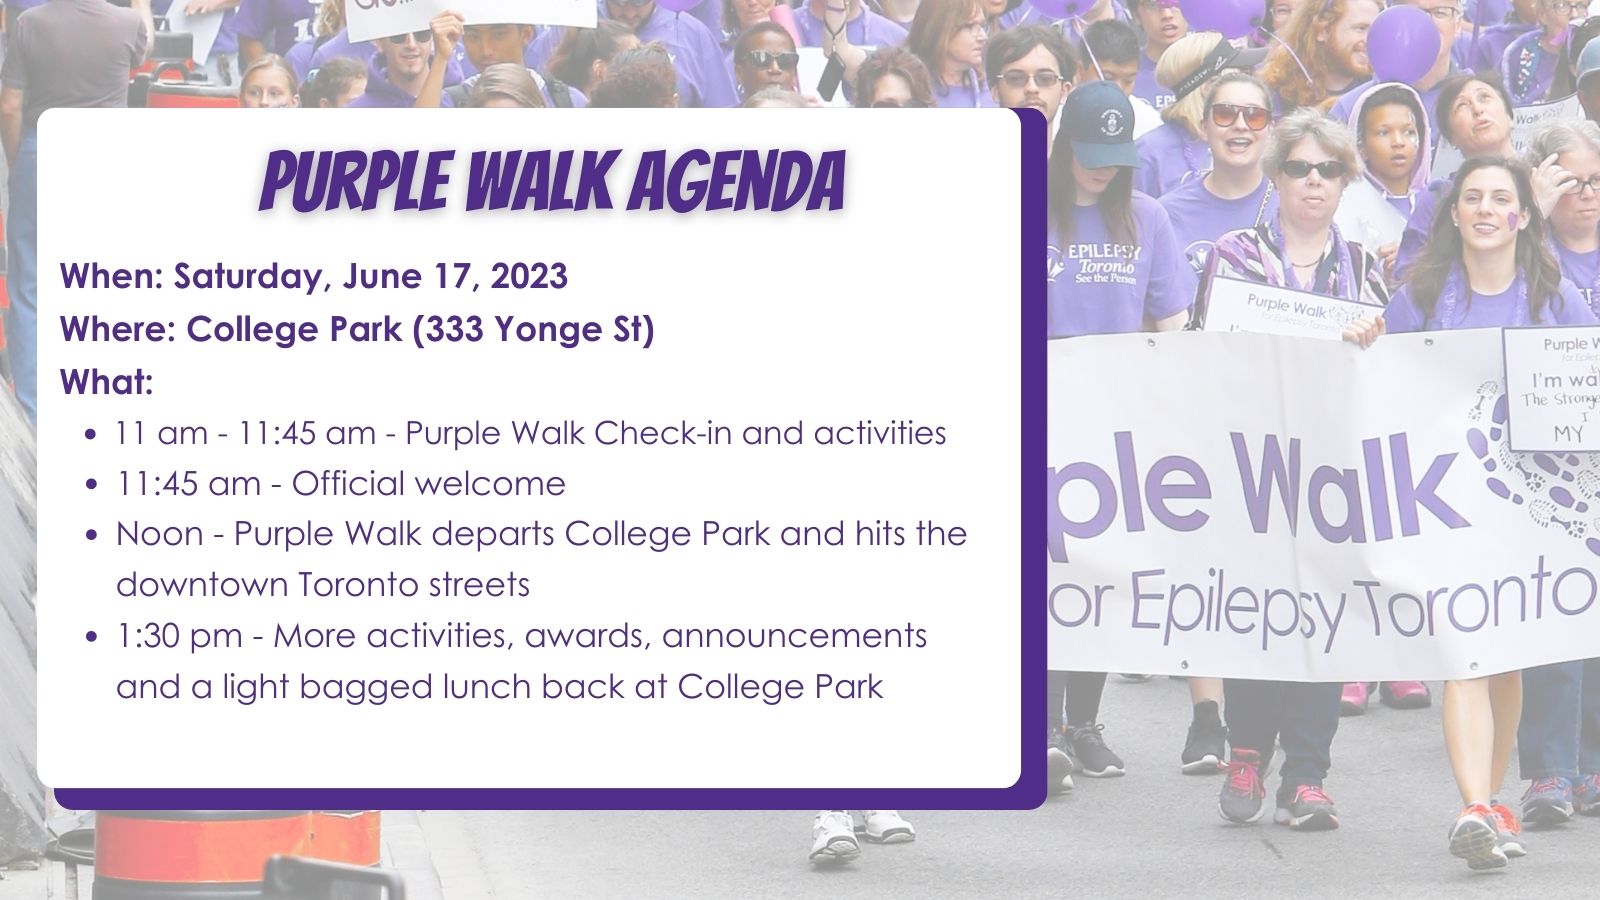 Text: Purple Walk Agenda. When: Saturday, June 17, 2023 Where: College Park (333 Yonge St) What: 11 am - 11:45 am - Purple Walk Check-in and activities 11:45 am - Official welcome Noon - Purple Walk departs College Park and hits the downtown Toronto streets 1:30 pm - More activities, awards, announcements and a light bagged lunch back at College Park.